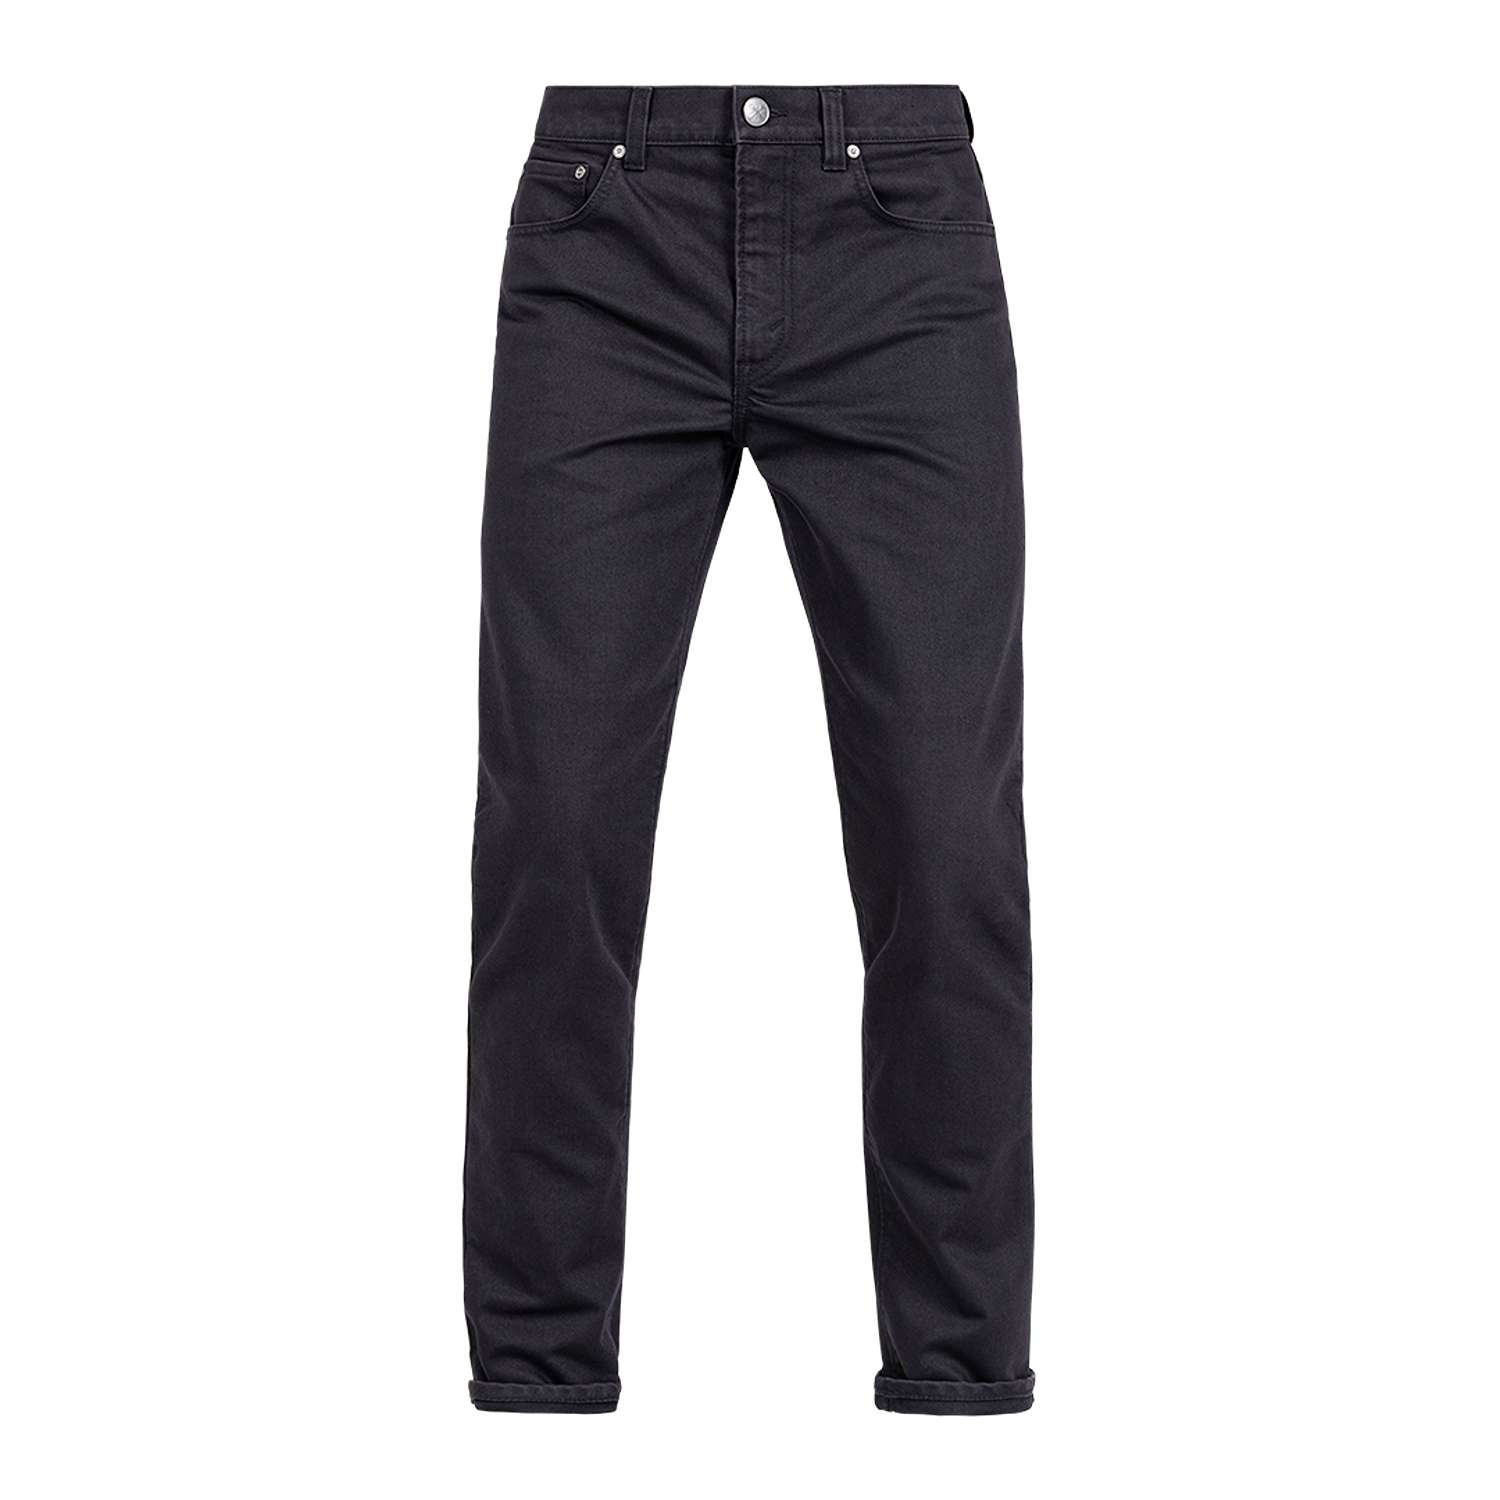 Image of John Doe Classic Tapered Jeans Black Black Taille W34/L34